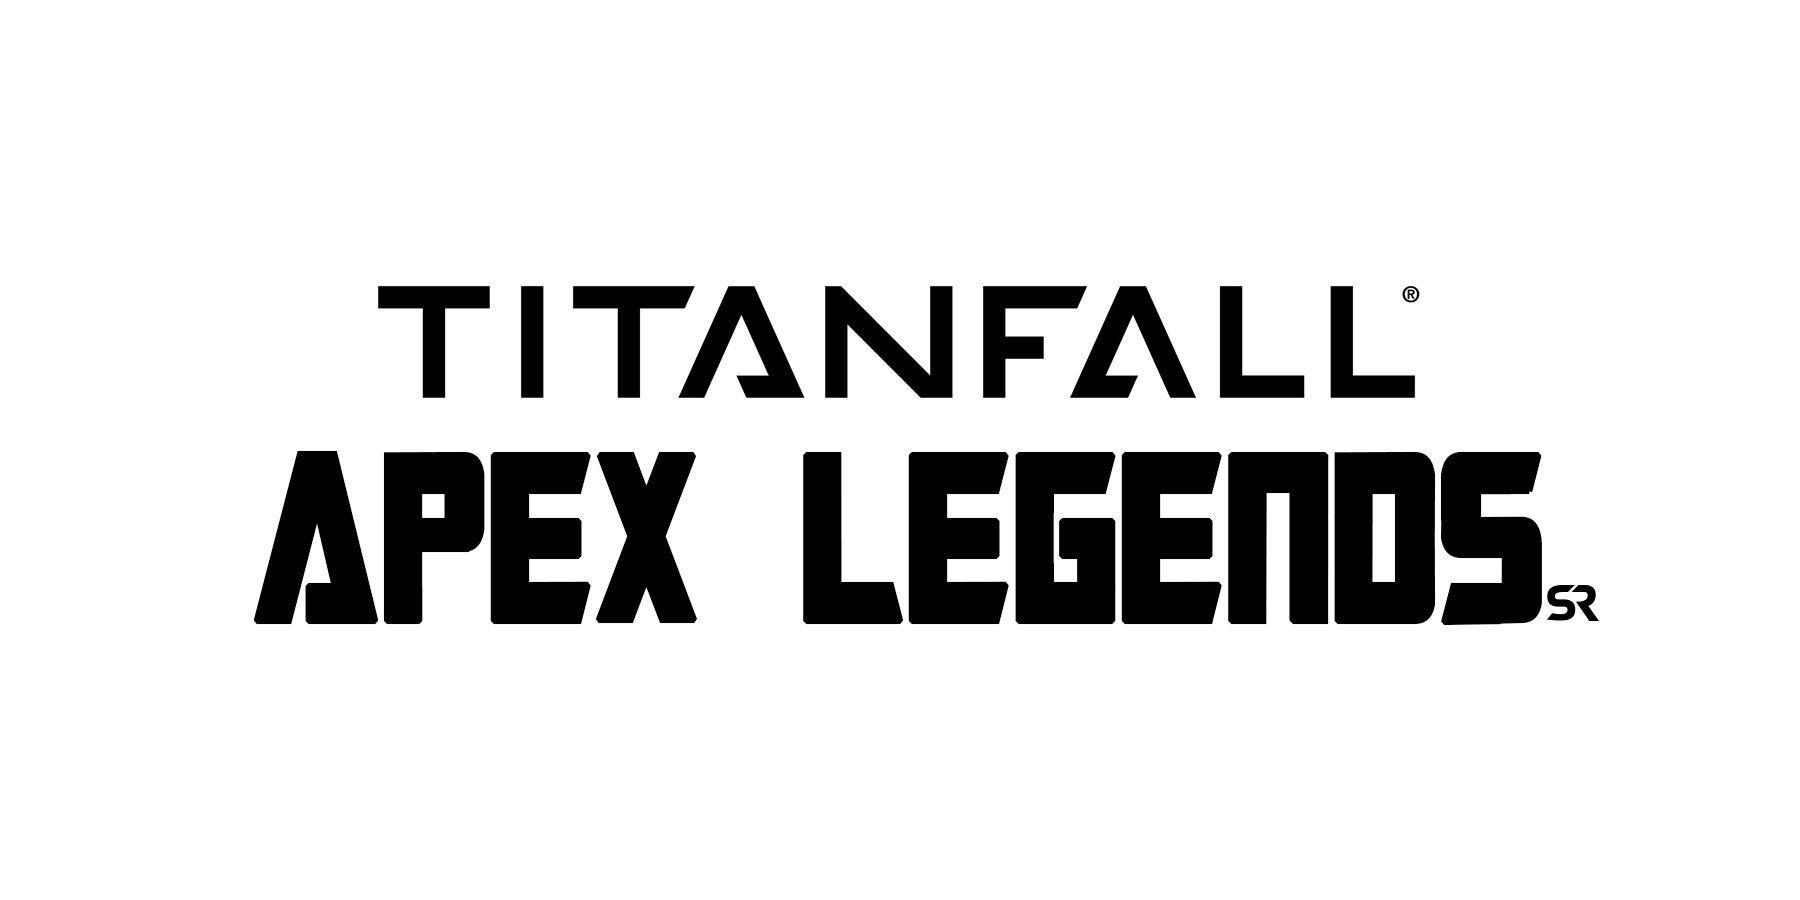 Titanfall Logo - Titanfall Battle Royale Is Releasing Soon But Won't Feature Titans